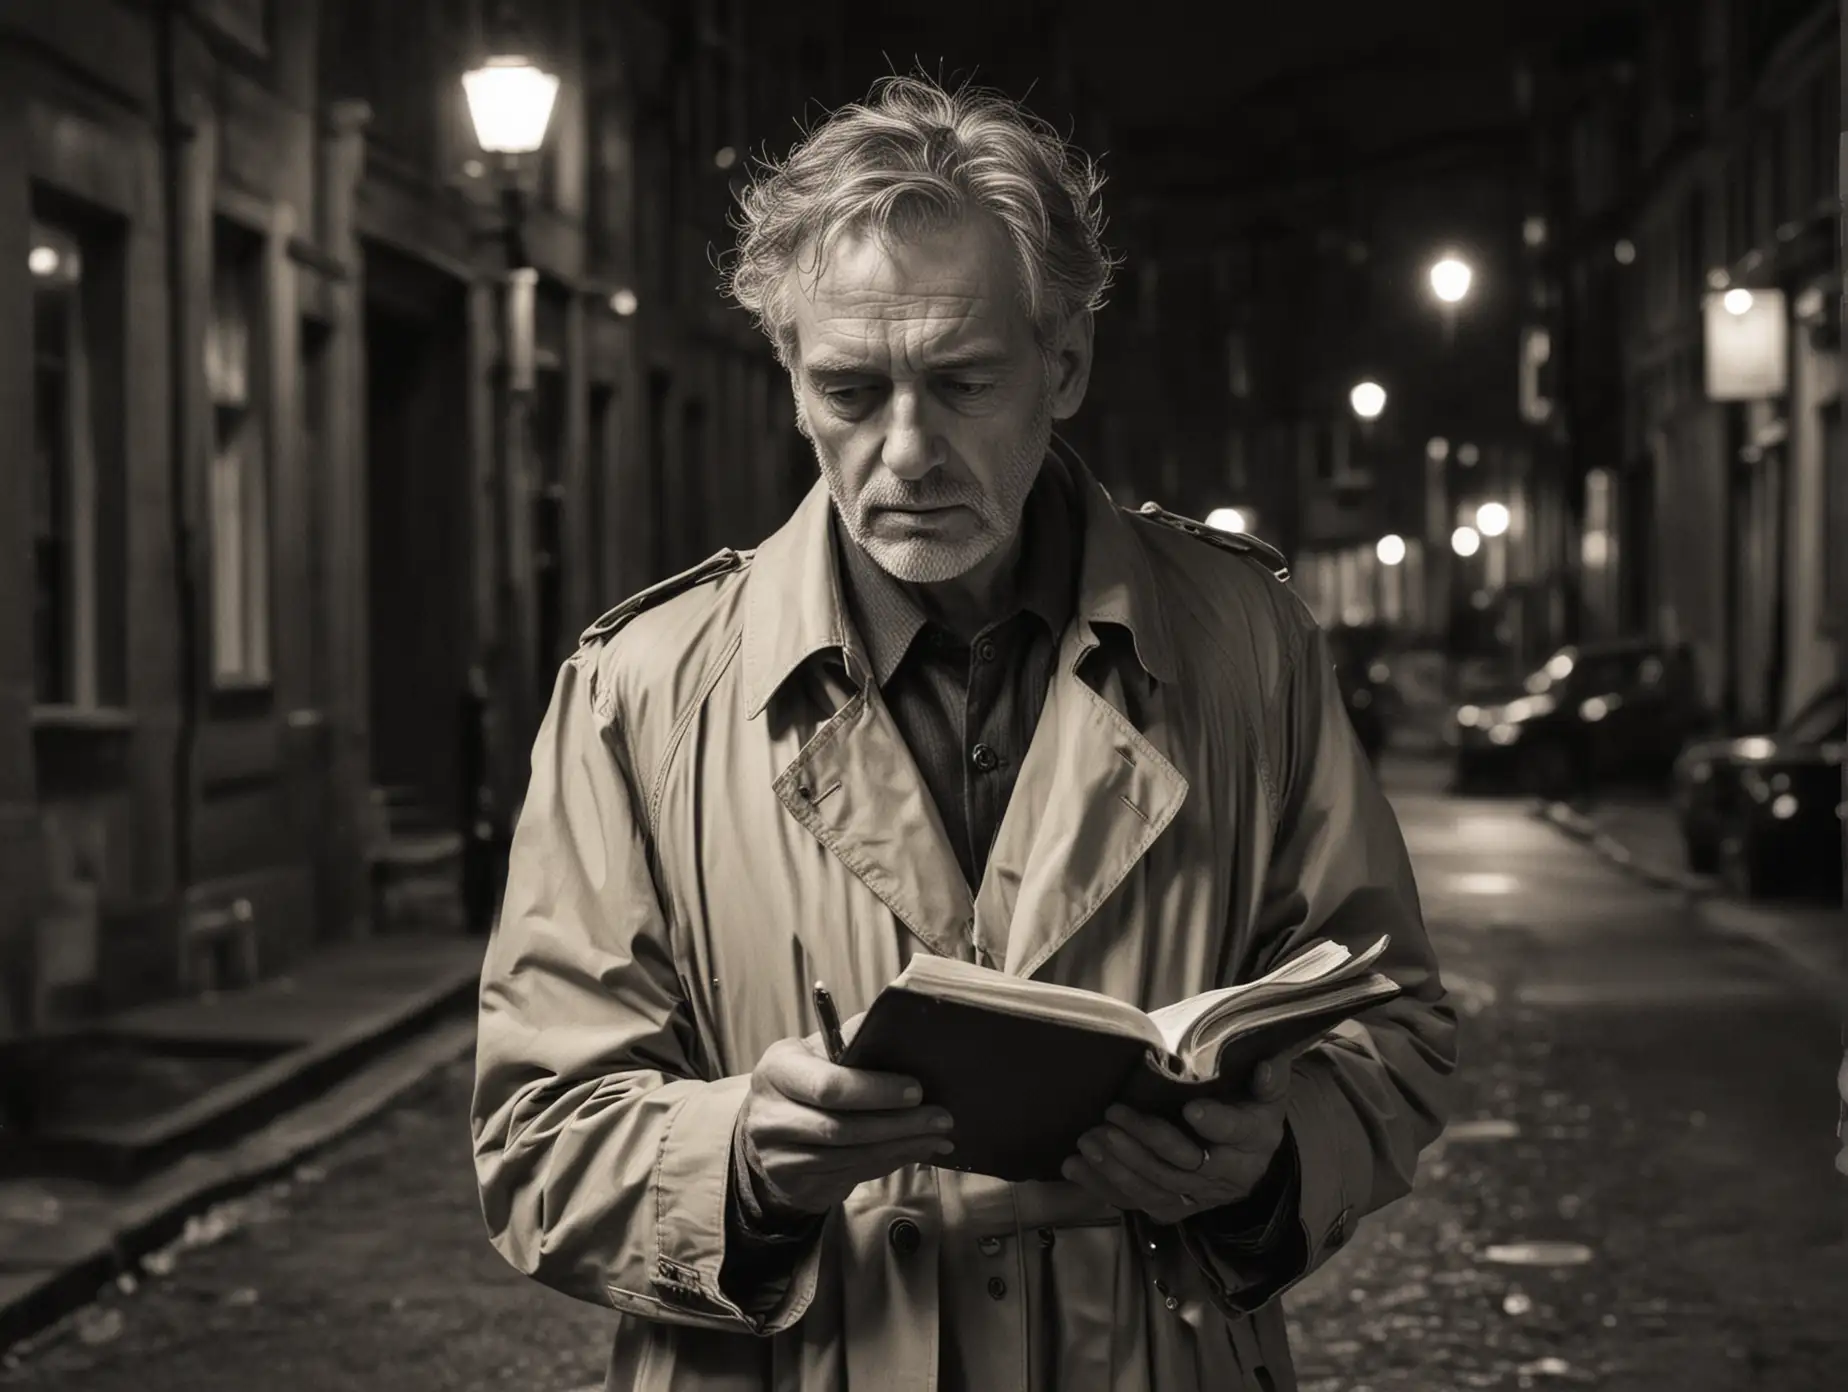 A 60 year old male poet wearing a trench coat. It is night. He is standing on the street, writing in a leather bound notebook. He is a serious man. 